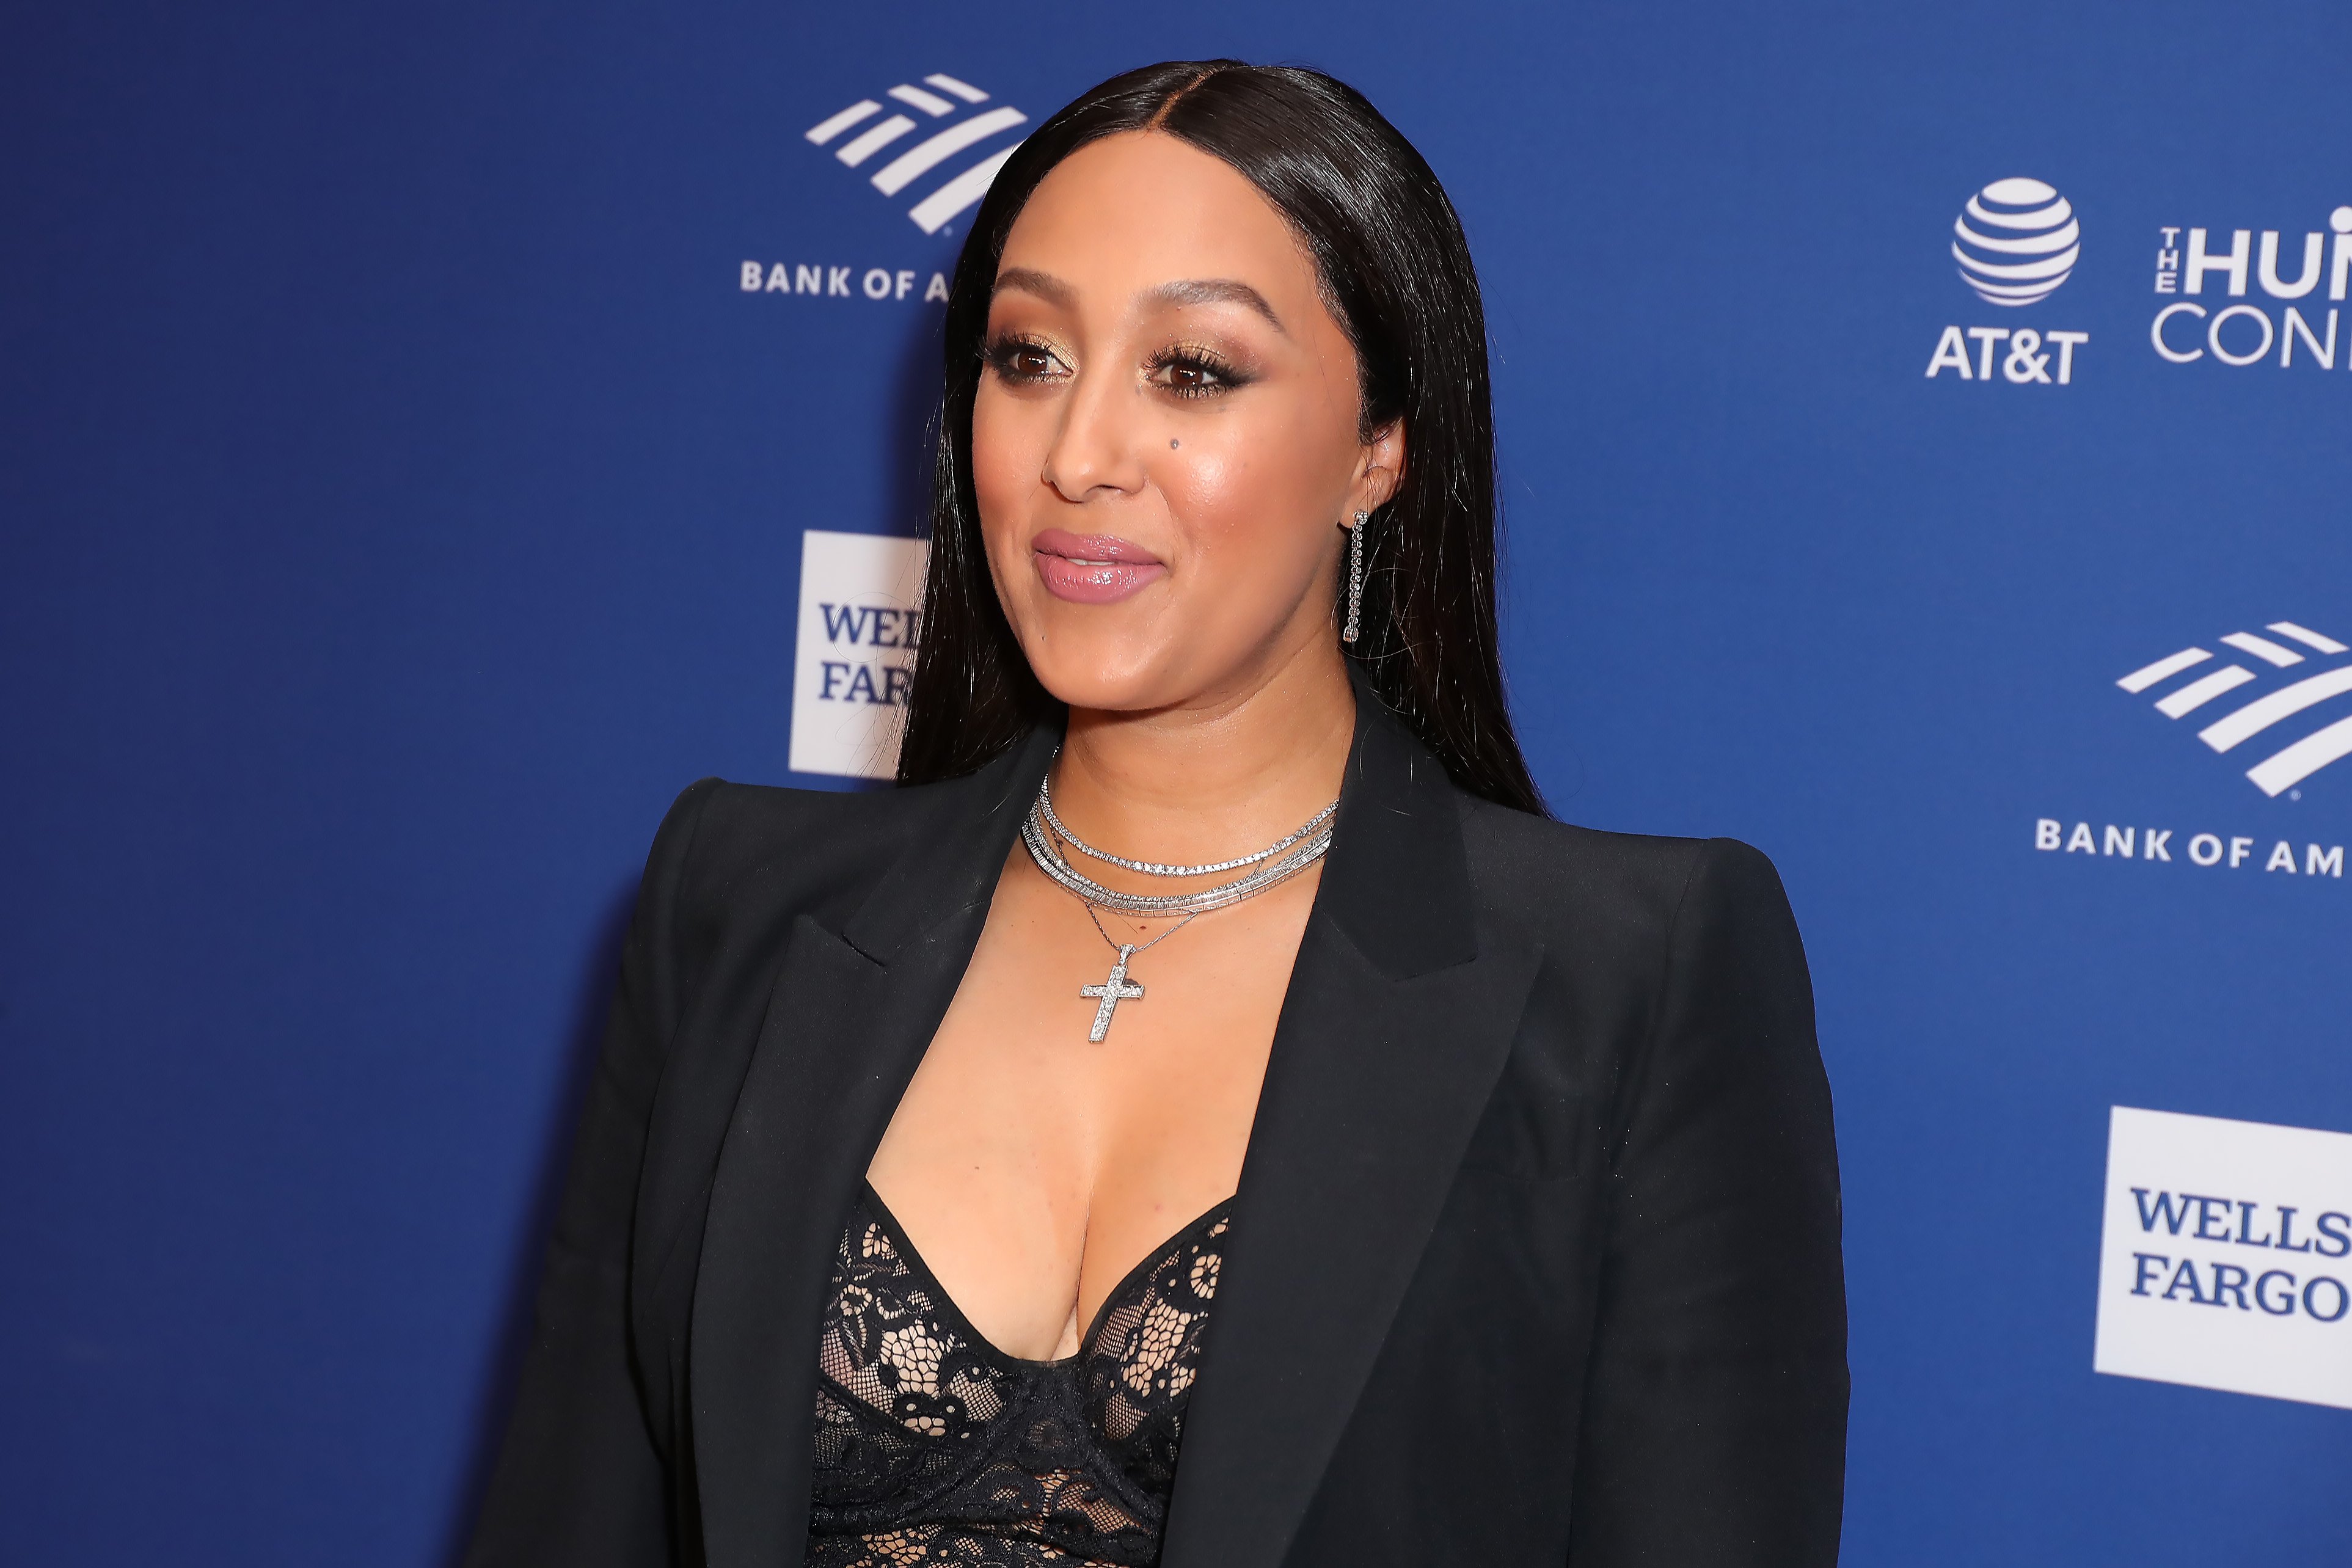 TV show host Tamera Mowry attends the non-televised 51st NAACP Image Awards Awards Dinner on February 21, 2020, in Hollywood, California. | Photo: Getty Images